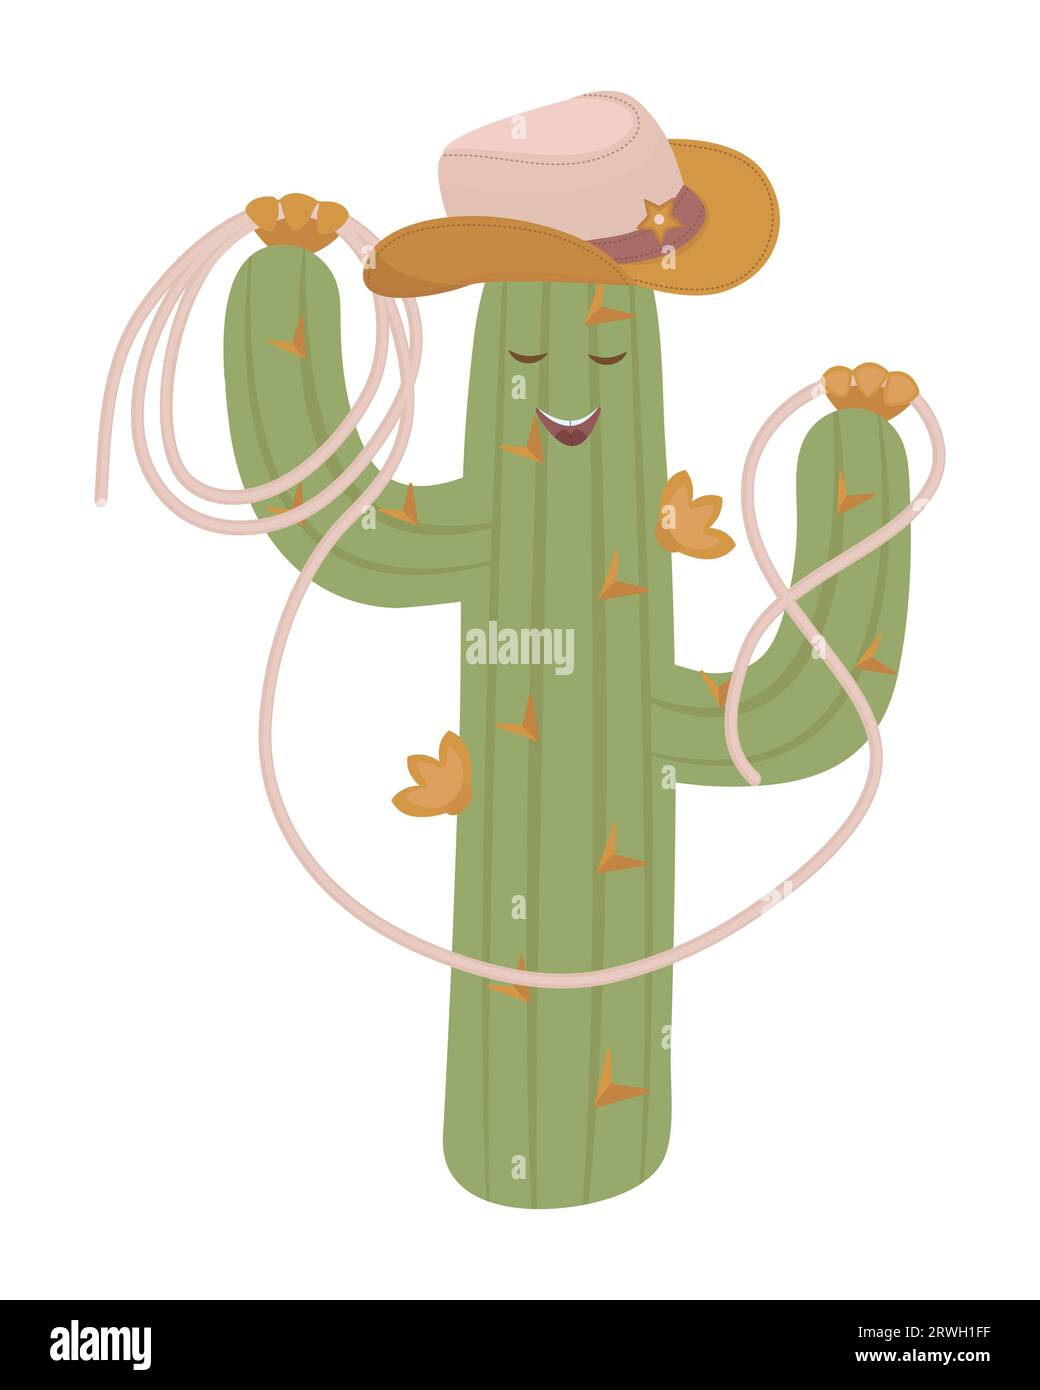 Cactus cowboy with stetson hat and lasso rope, cute color vector illustration made in boho style Stock Vector